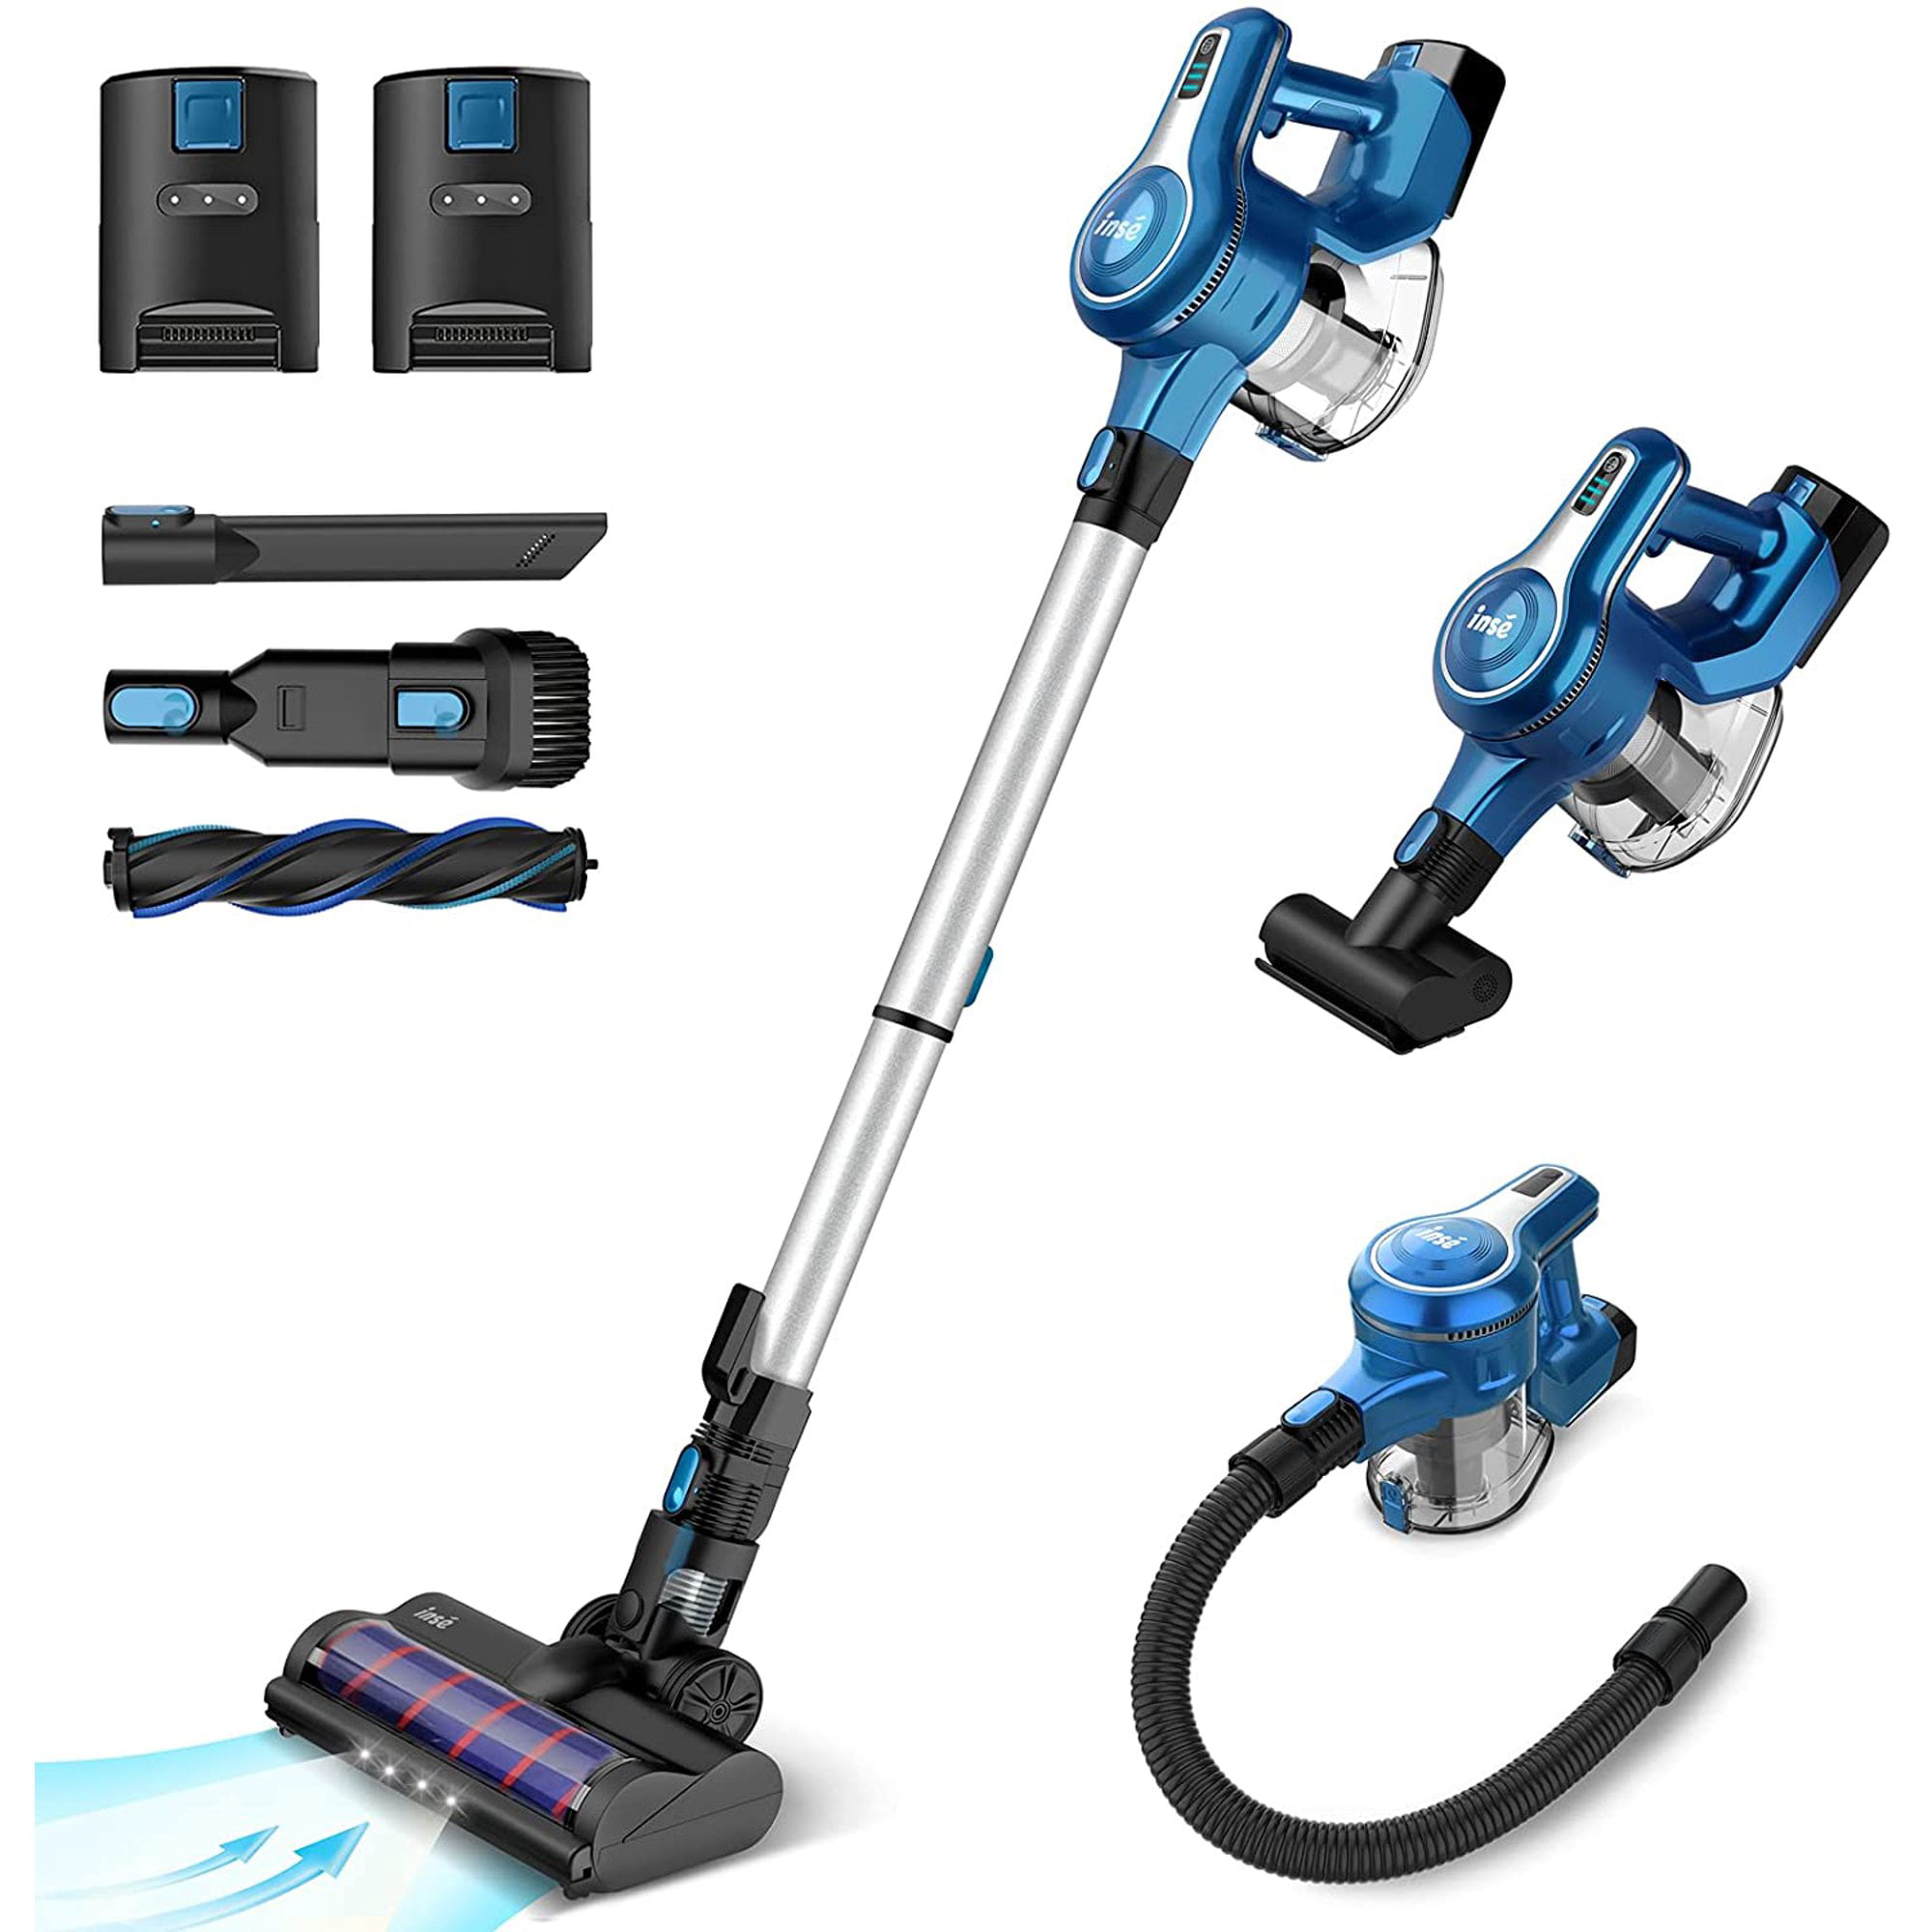 43 Mins Running Detachable Battery for Car Hard Floor Carpet Pet Hair Cleaning 26kPa Stick Vacuum Powerful Suction with Digital Display Cordless Vacuum Cleaner